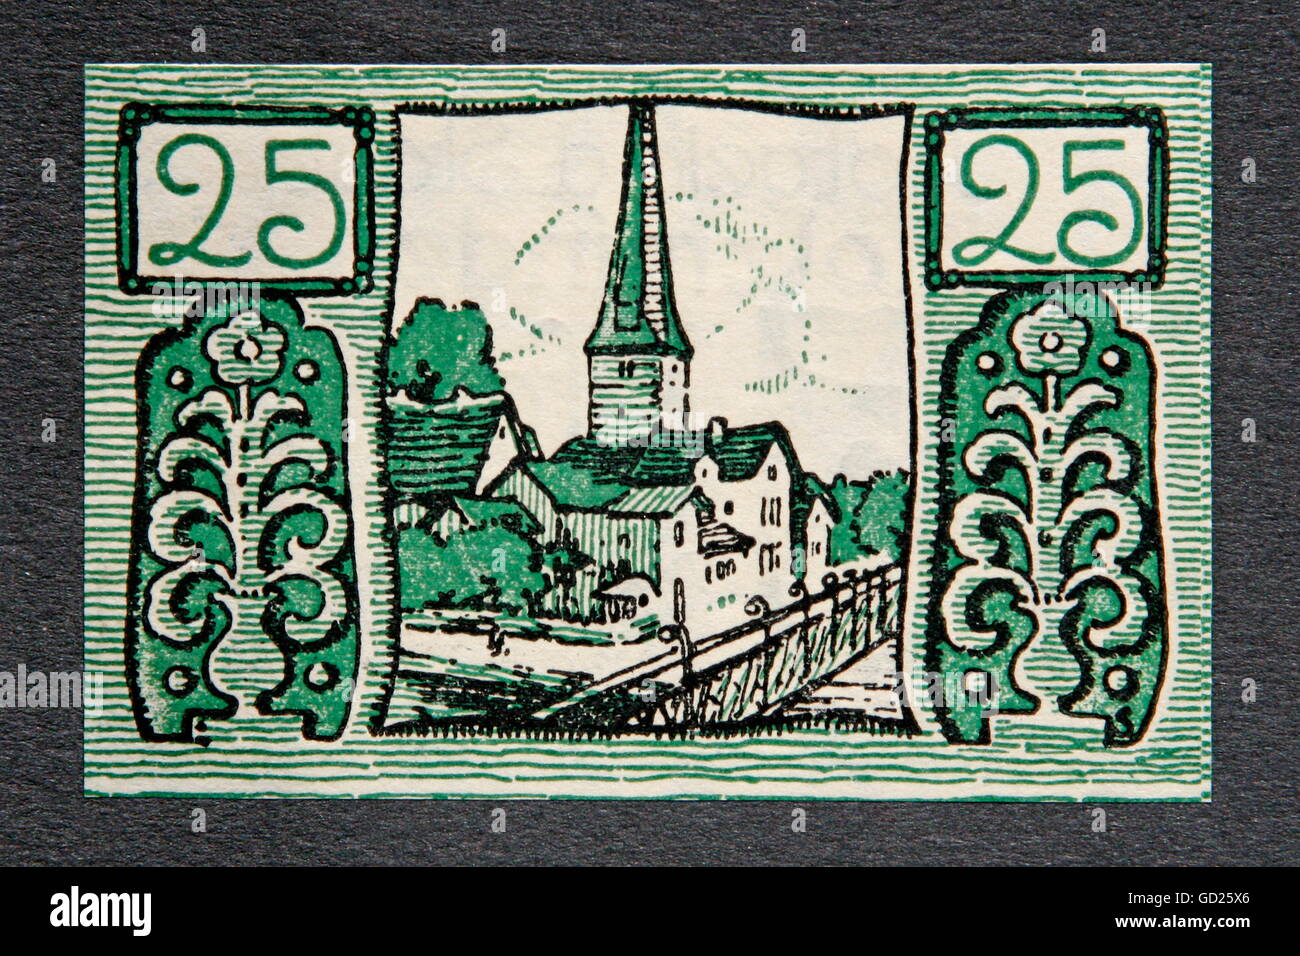 finances / money, bank notes, Germany, 25 Pfennig, obverse, released by the municipal authorities of Holzminden, valid until 1.5.1922, Additional-Rights-Clearences-Not Available Stock Photo